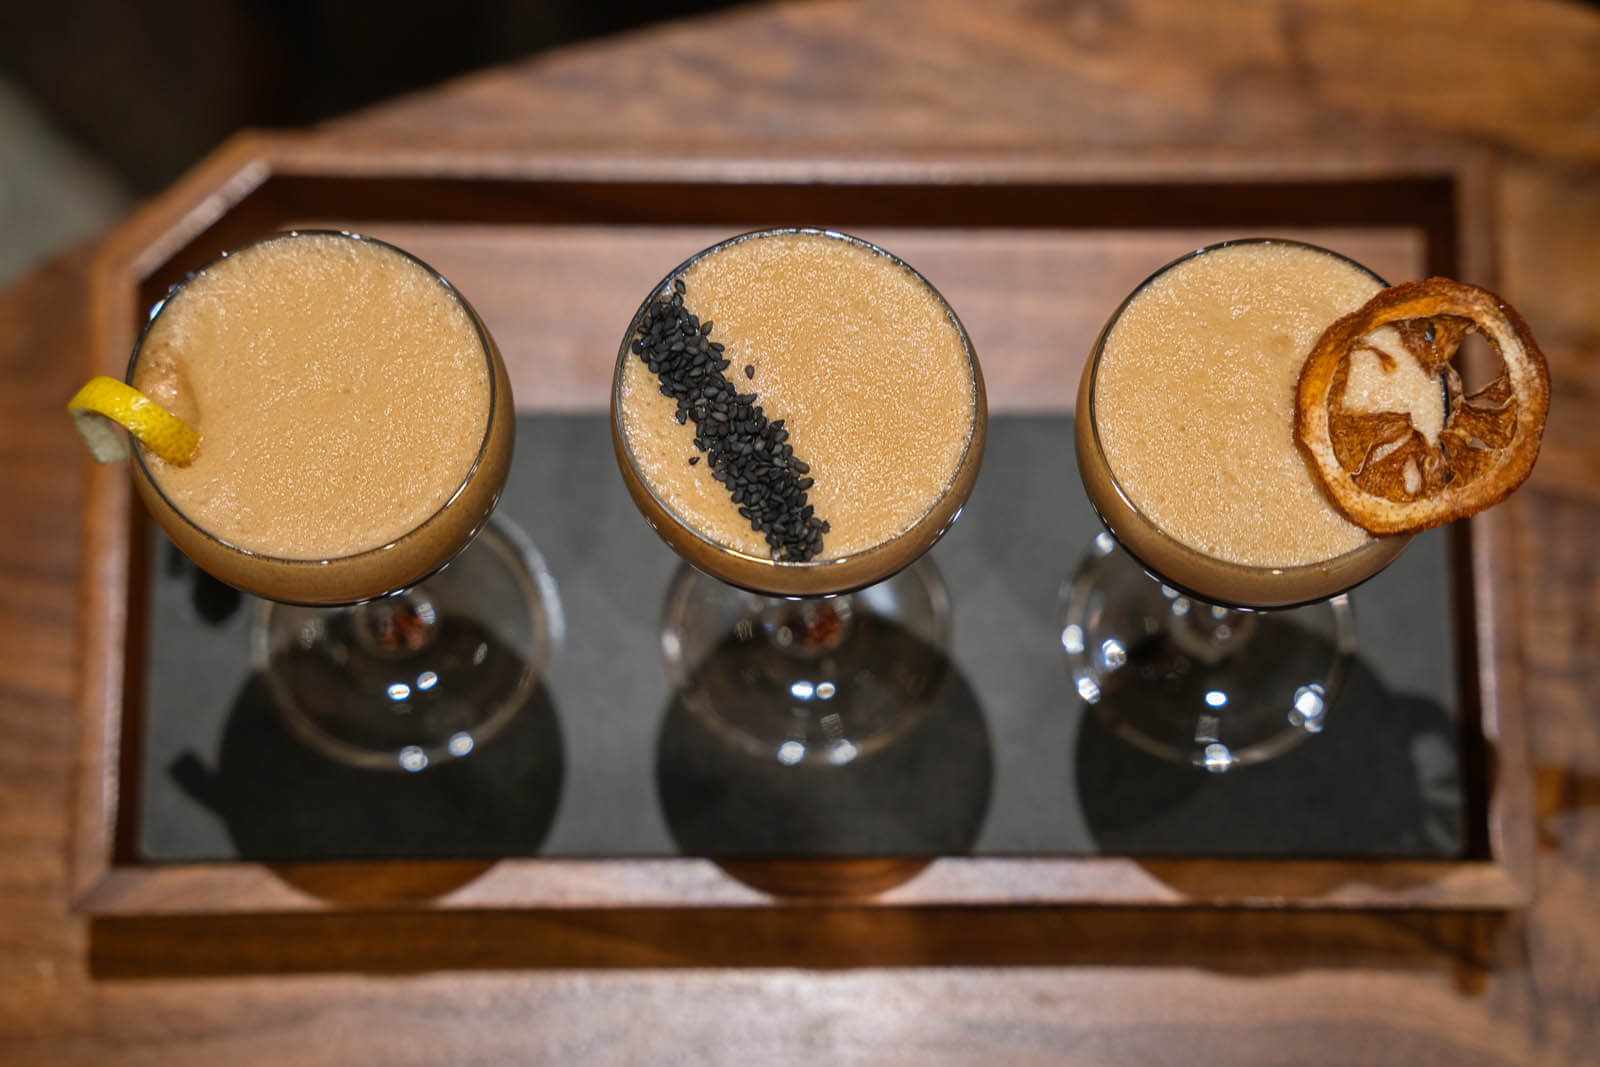 Espresso Martini flight at Starbucks Reserve Roastery in the Meatpacking District NYC